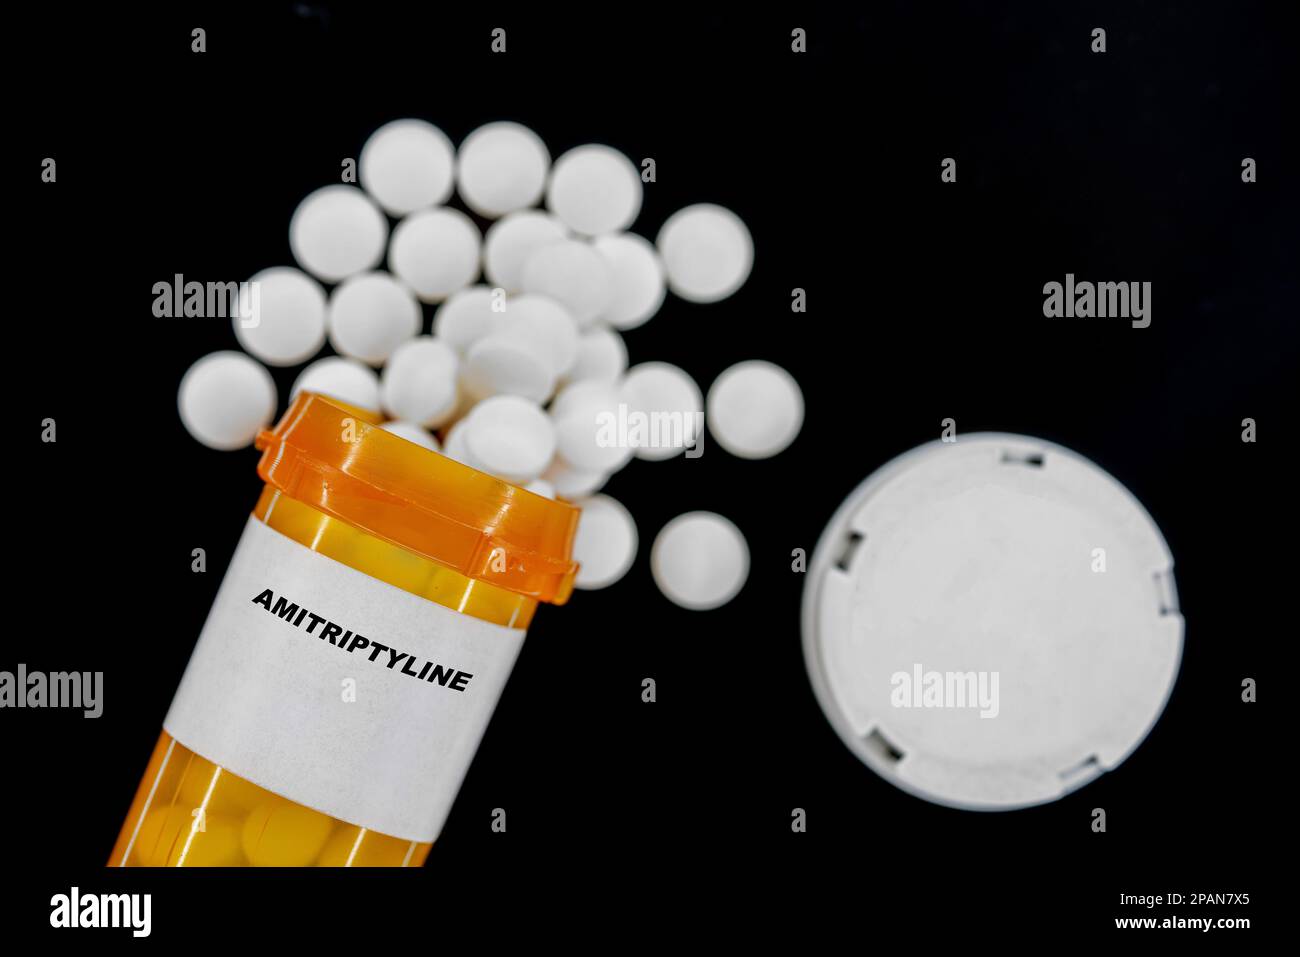 Amitriptyline Rx medical pills in plactic Bottle with tablets. Pills spilling out from yellow container. Stock Photo